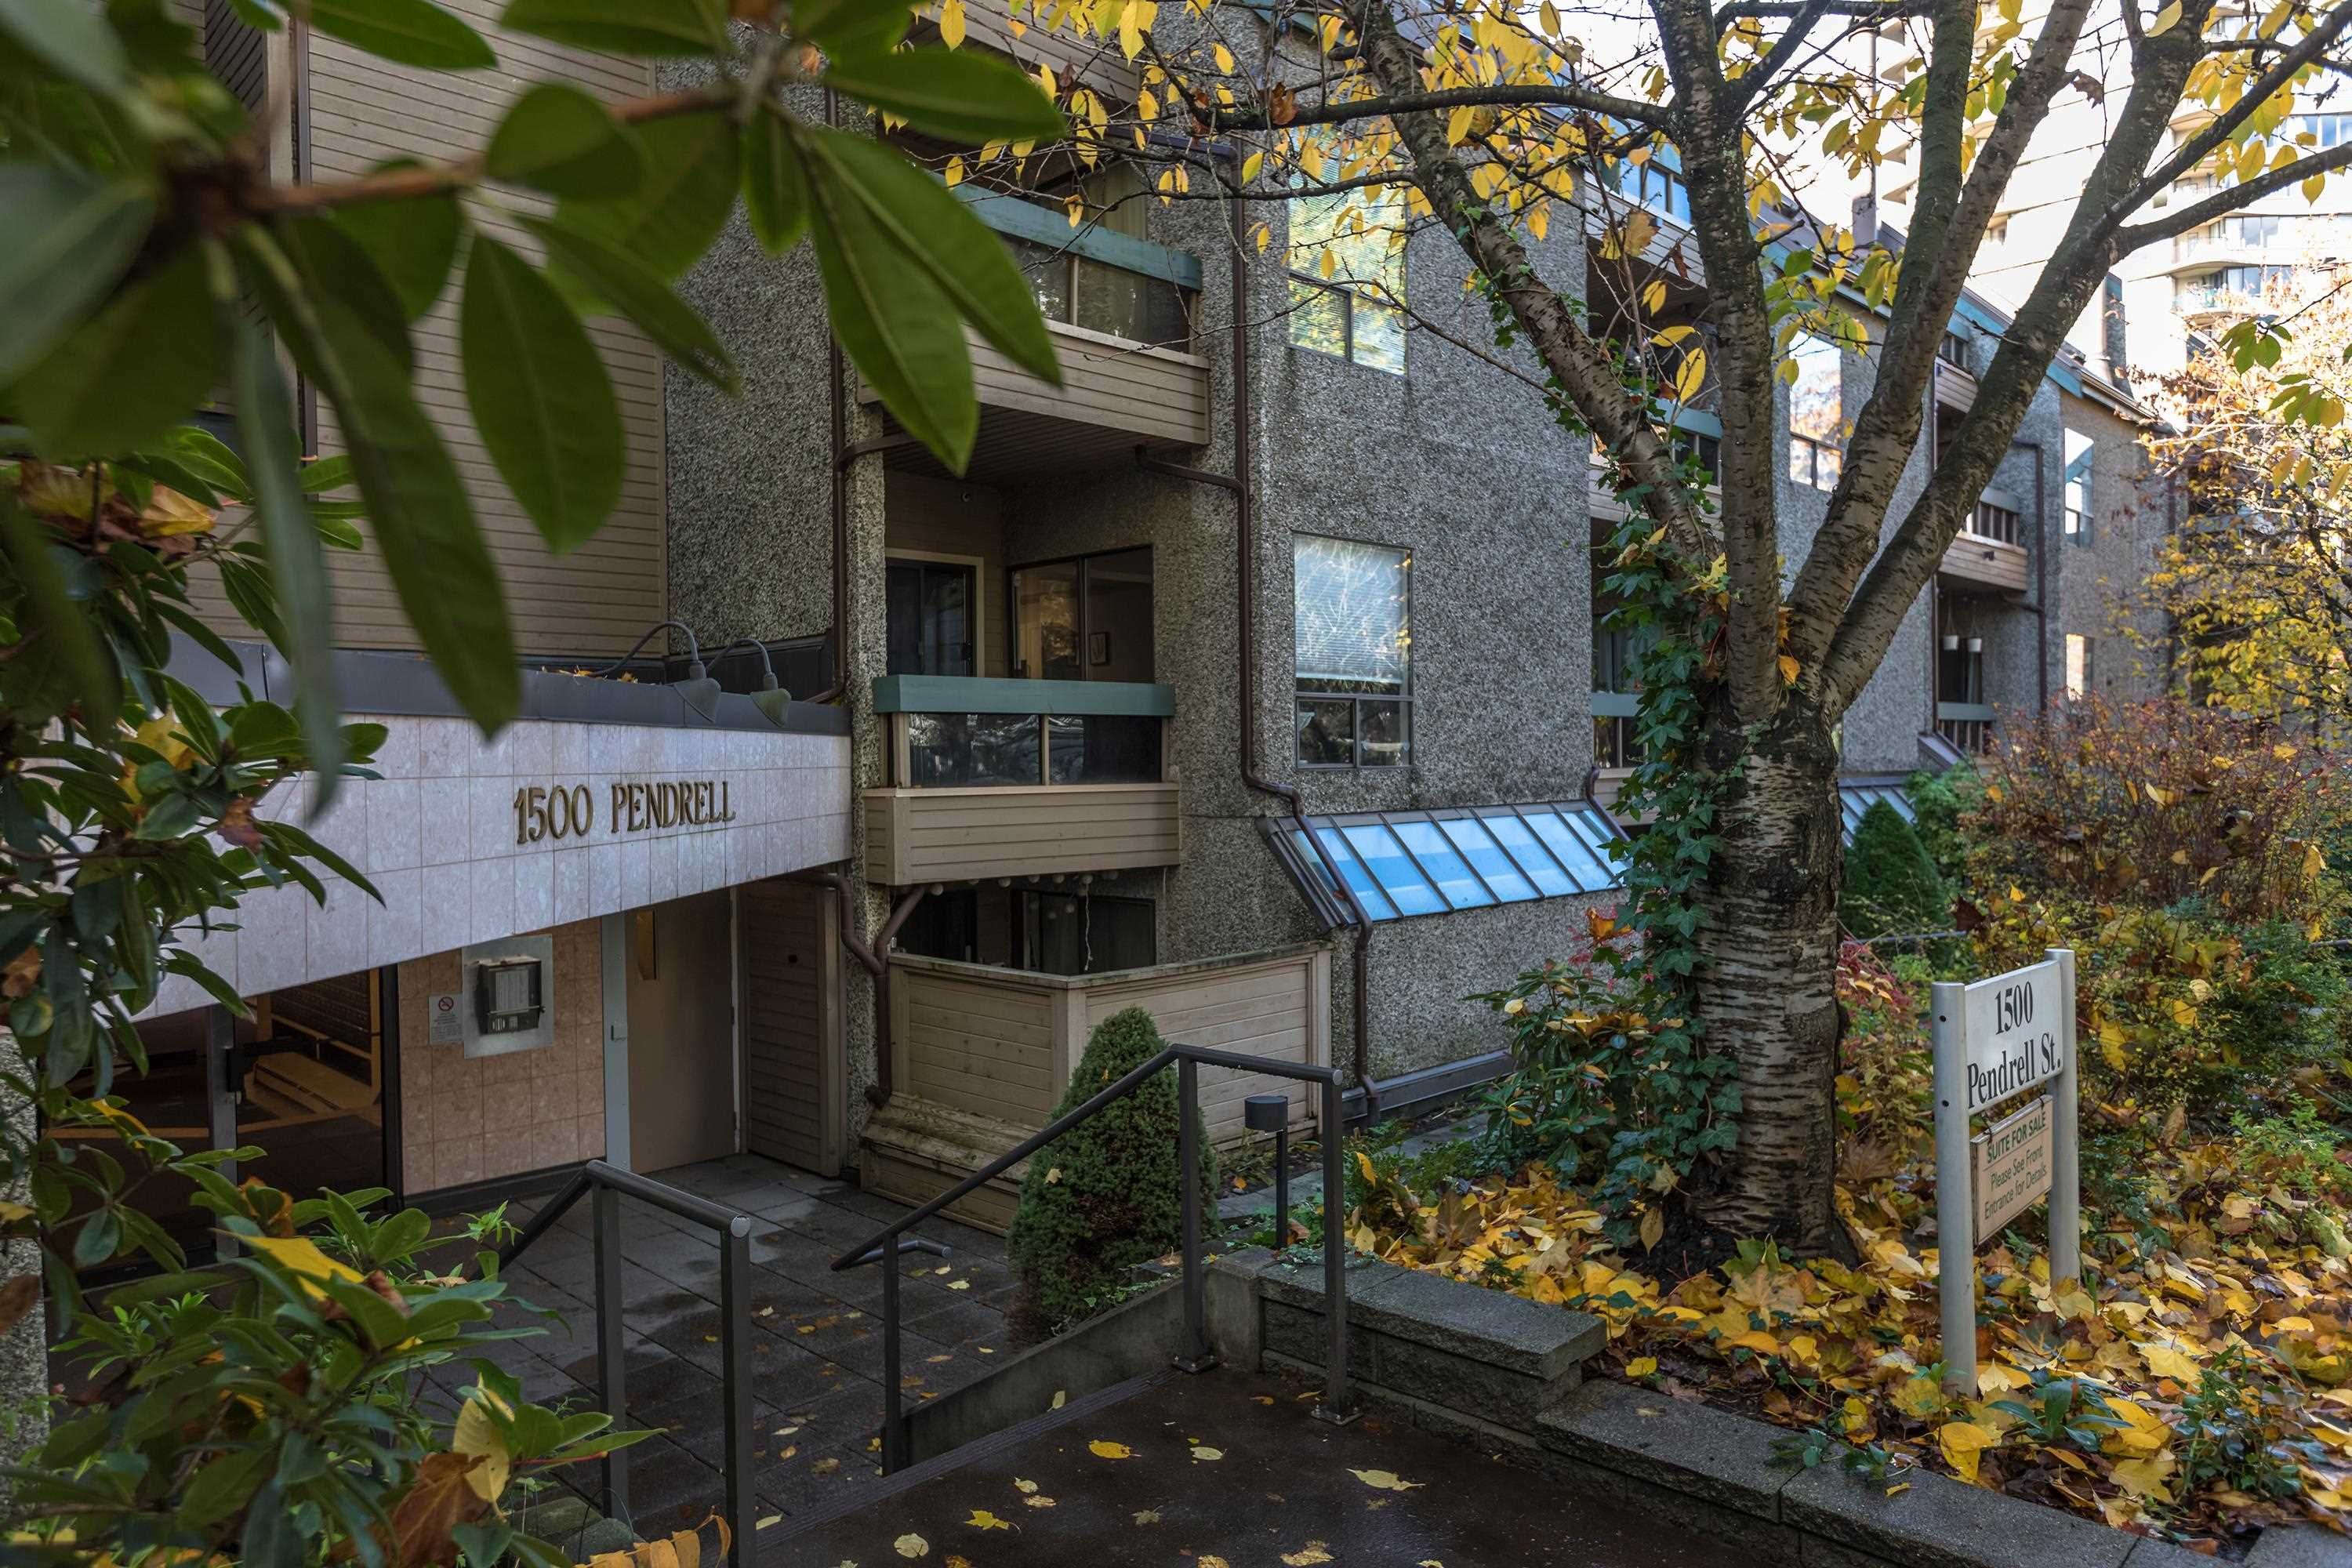 New property listed at 111 1500 PENDRELL ST in Vancouver